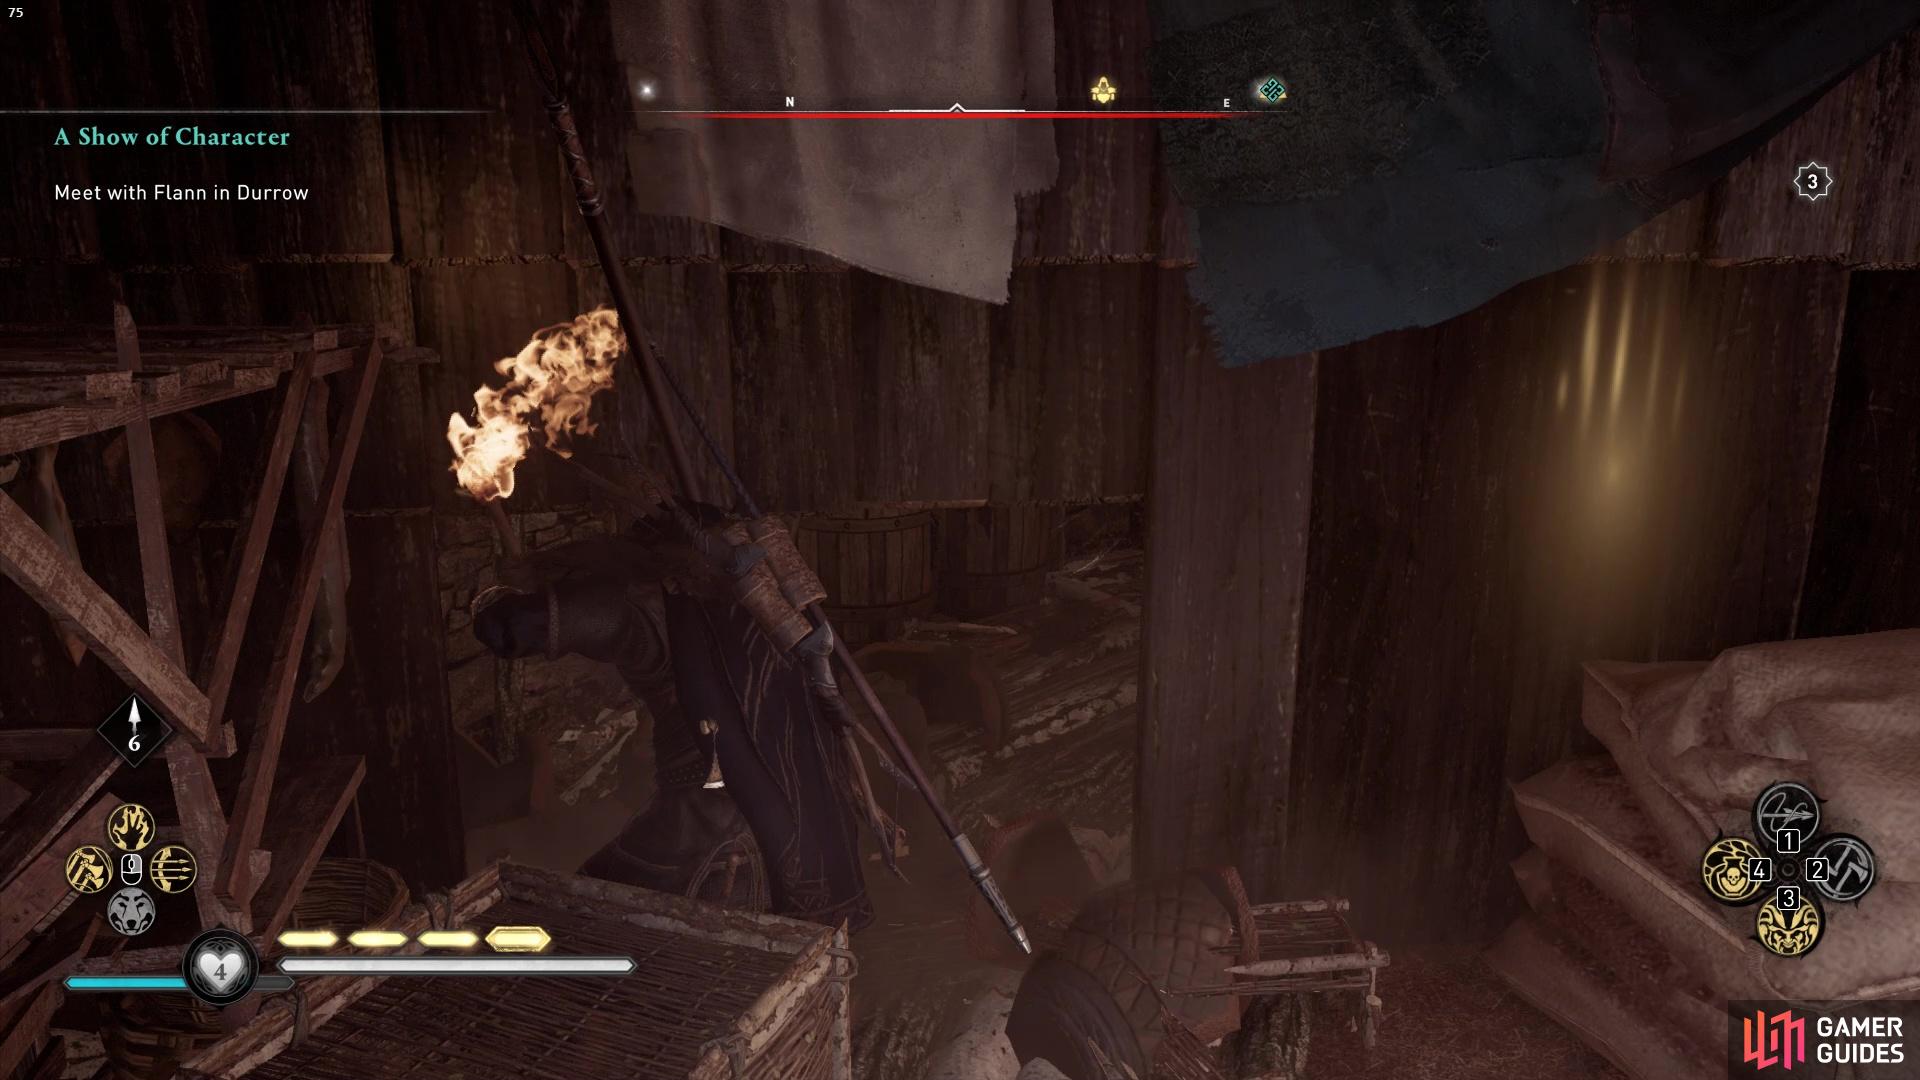 youll need to break some objects to reveal a hole in the wall you can head through to reach the chest.